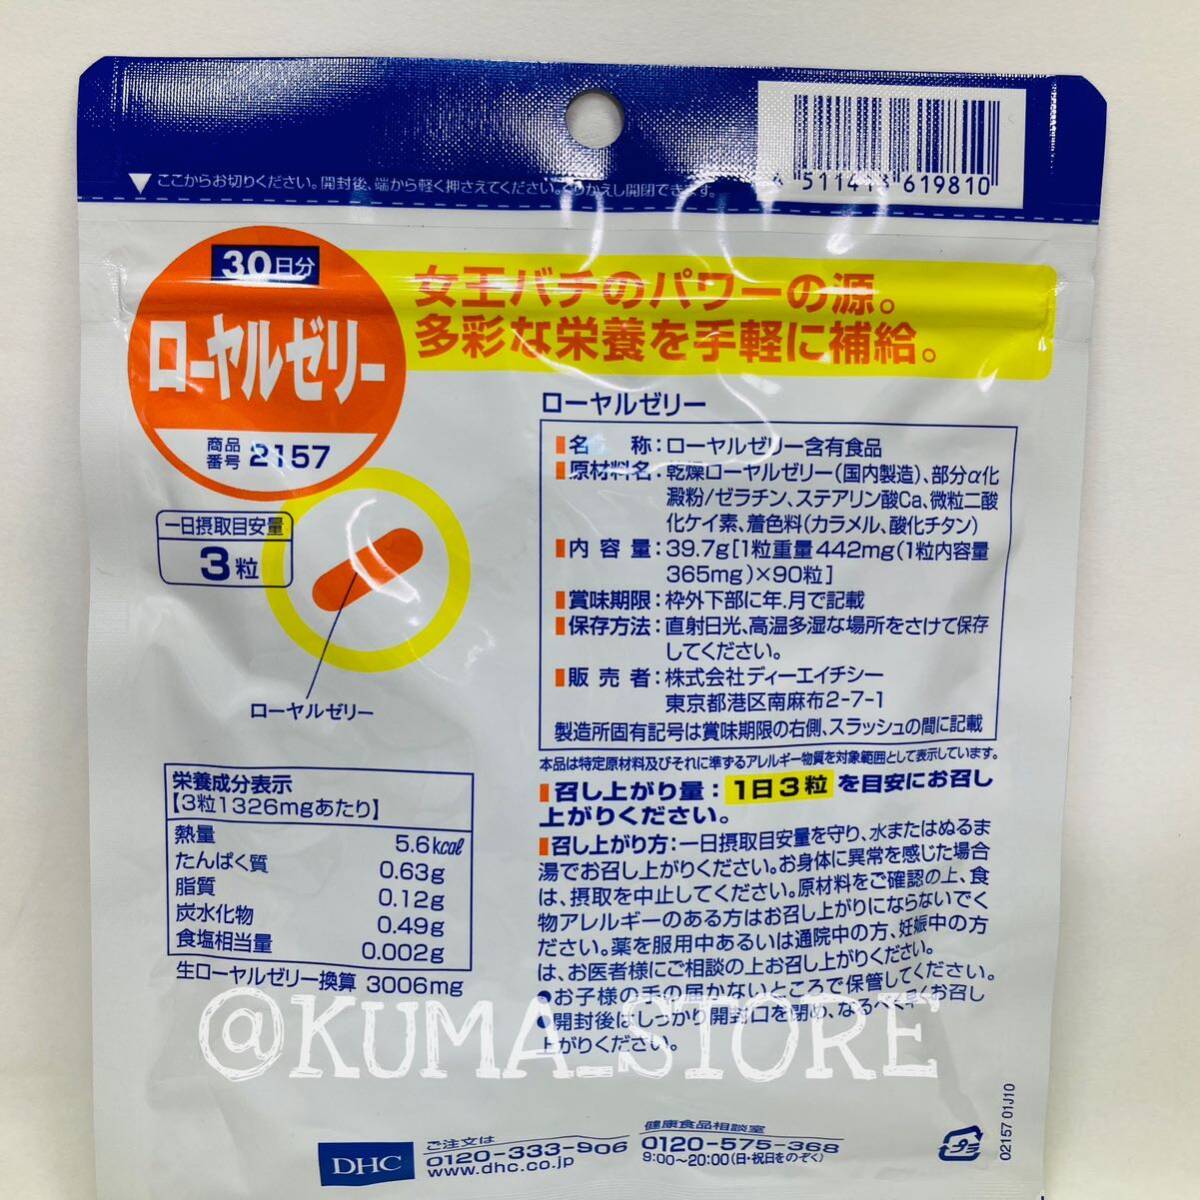 [2 sack ]DHC royal jelly 30 day minute supplement health food 